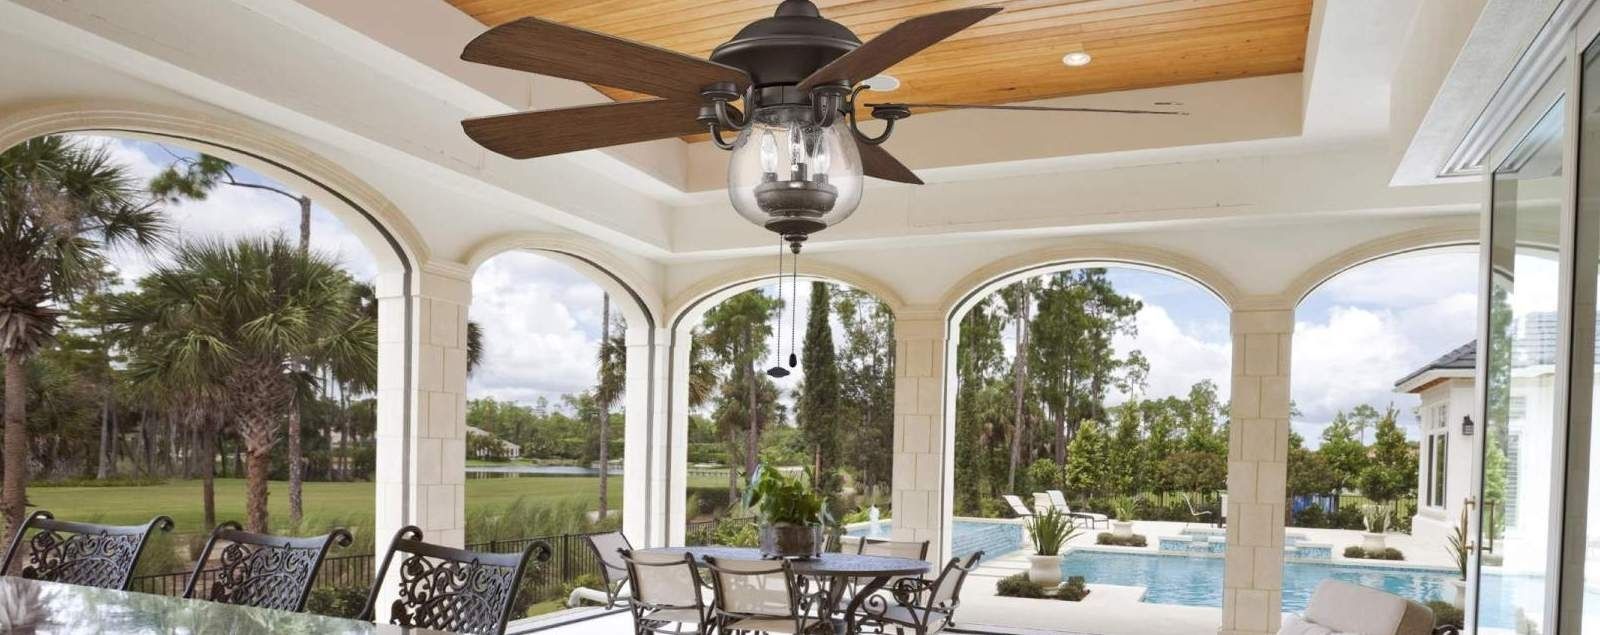 Most Up To Date High End Outdoor Ceiling Fans Intended For Outdoor Ceiling Fans – Shop Wet, Dry, And Damp Rated Outdoor Fans (View 1 of 20)